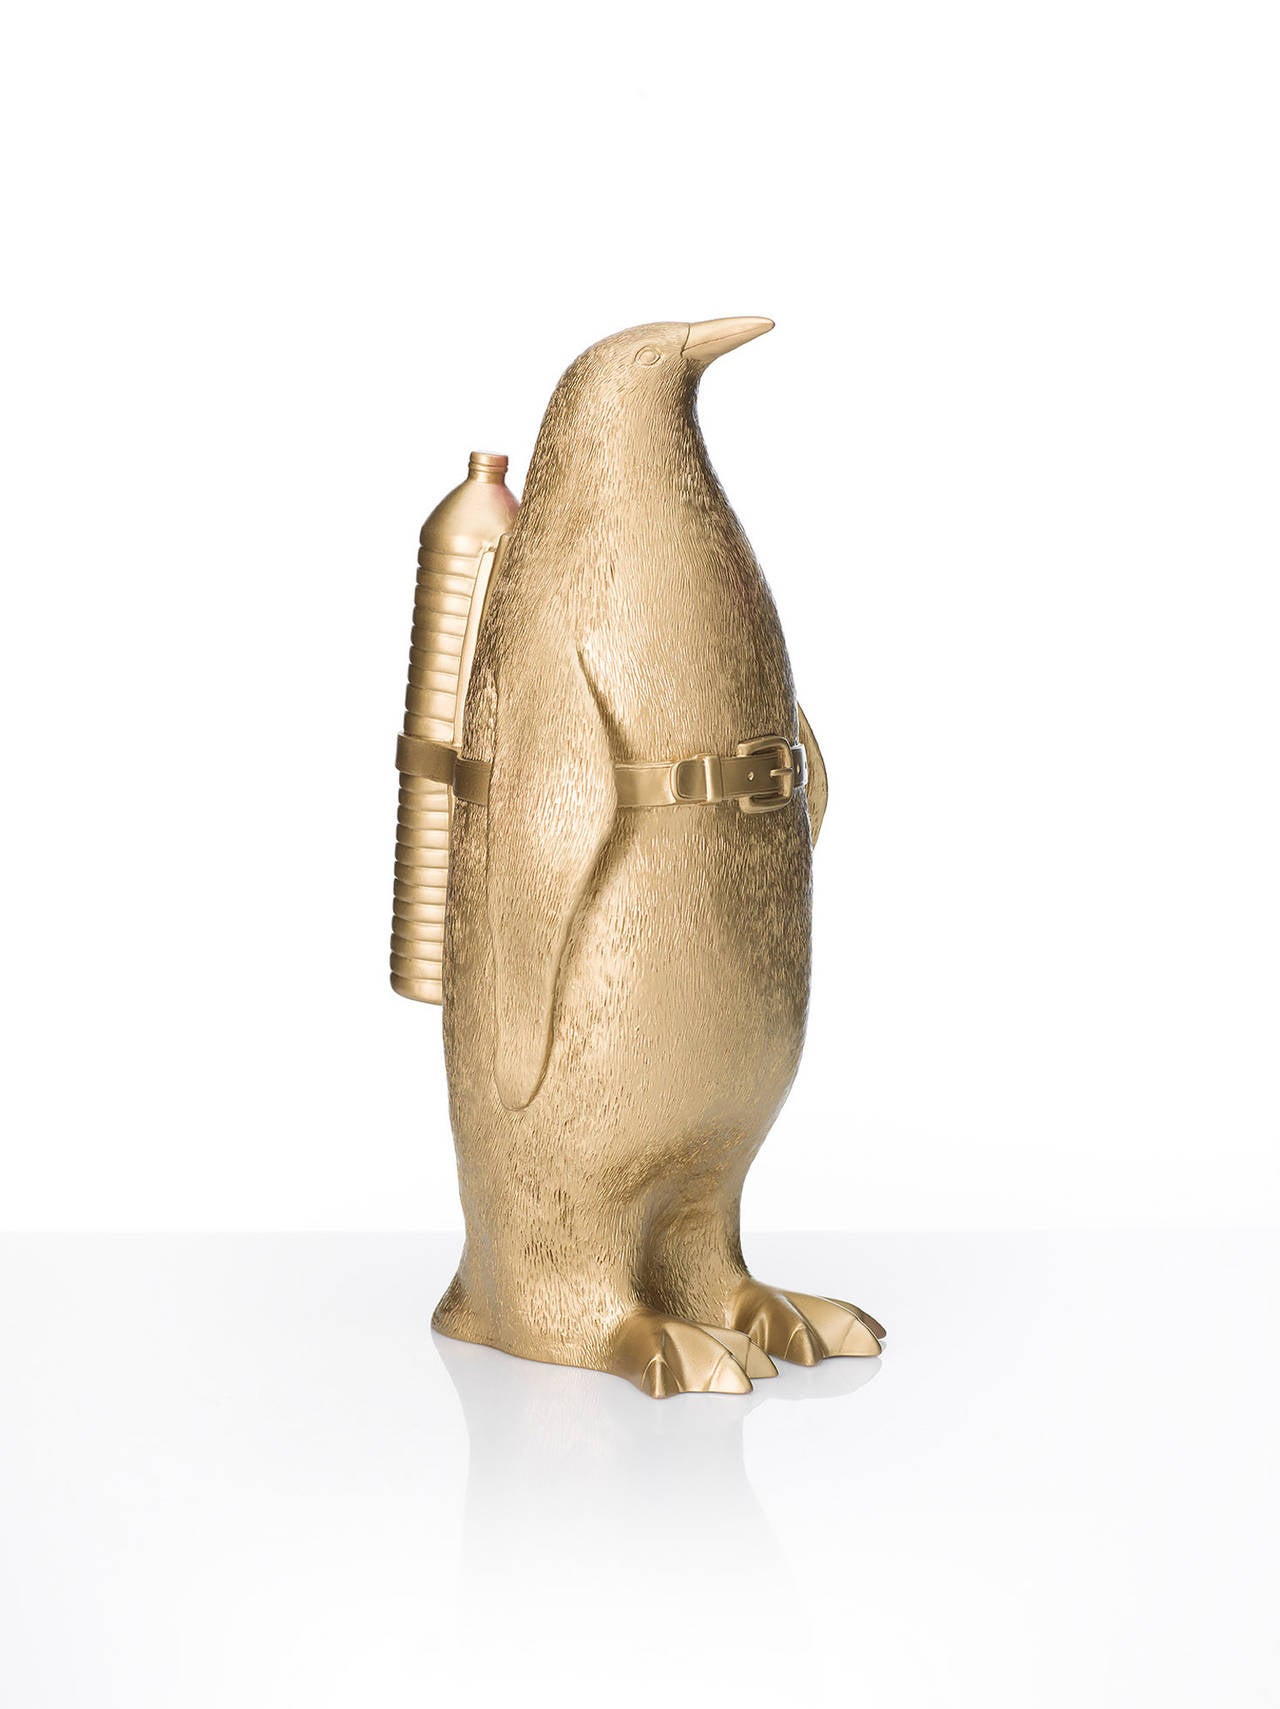 William Sweetlove Figurative Sculpture - Small cloned Penguin with water bottle.